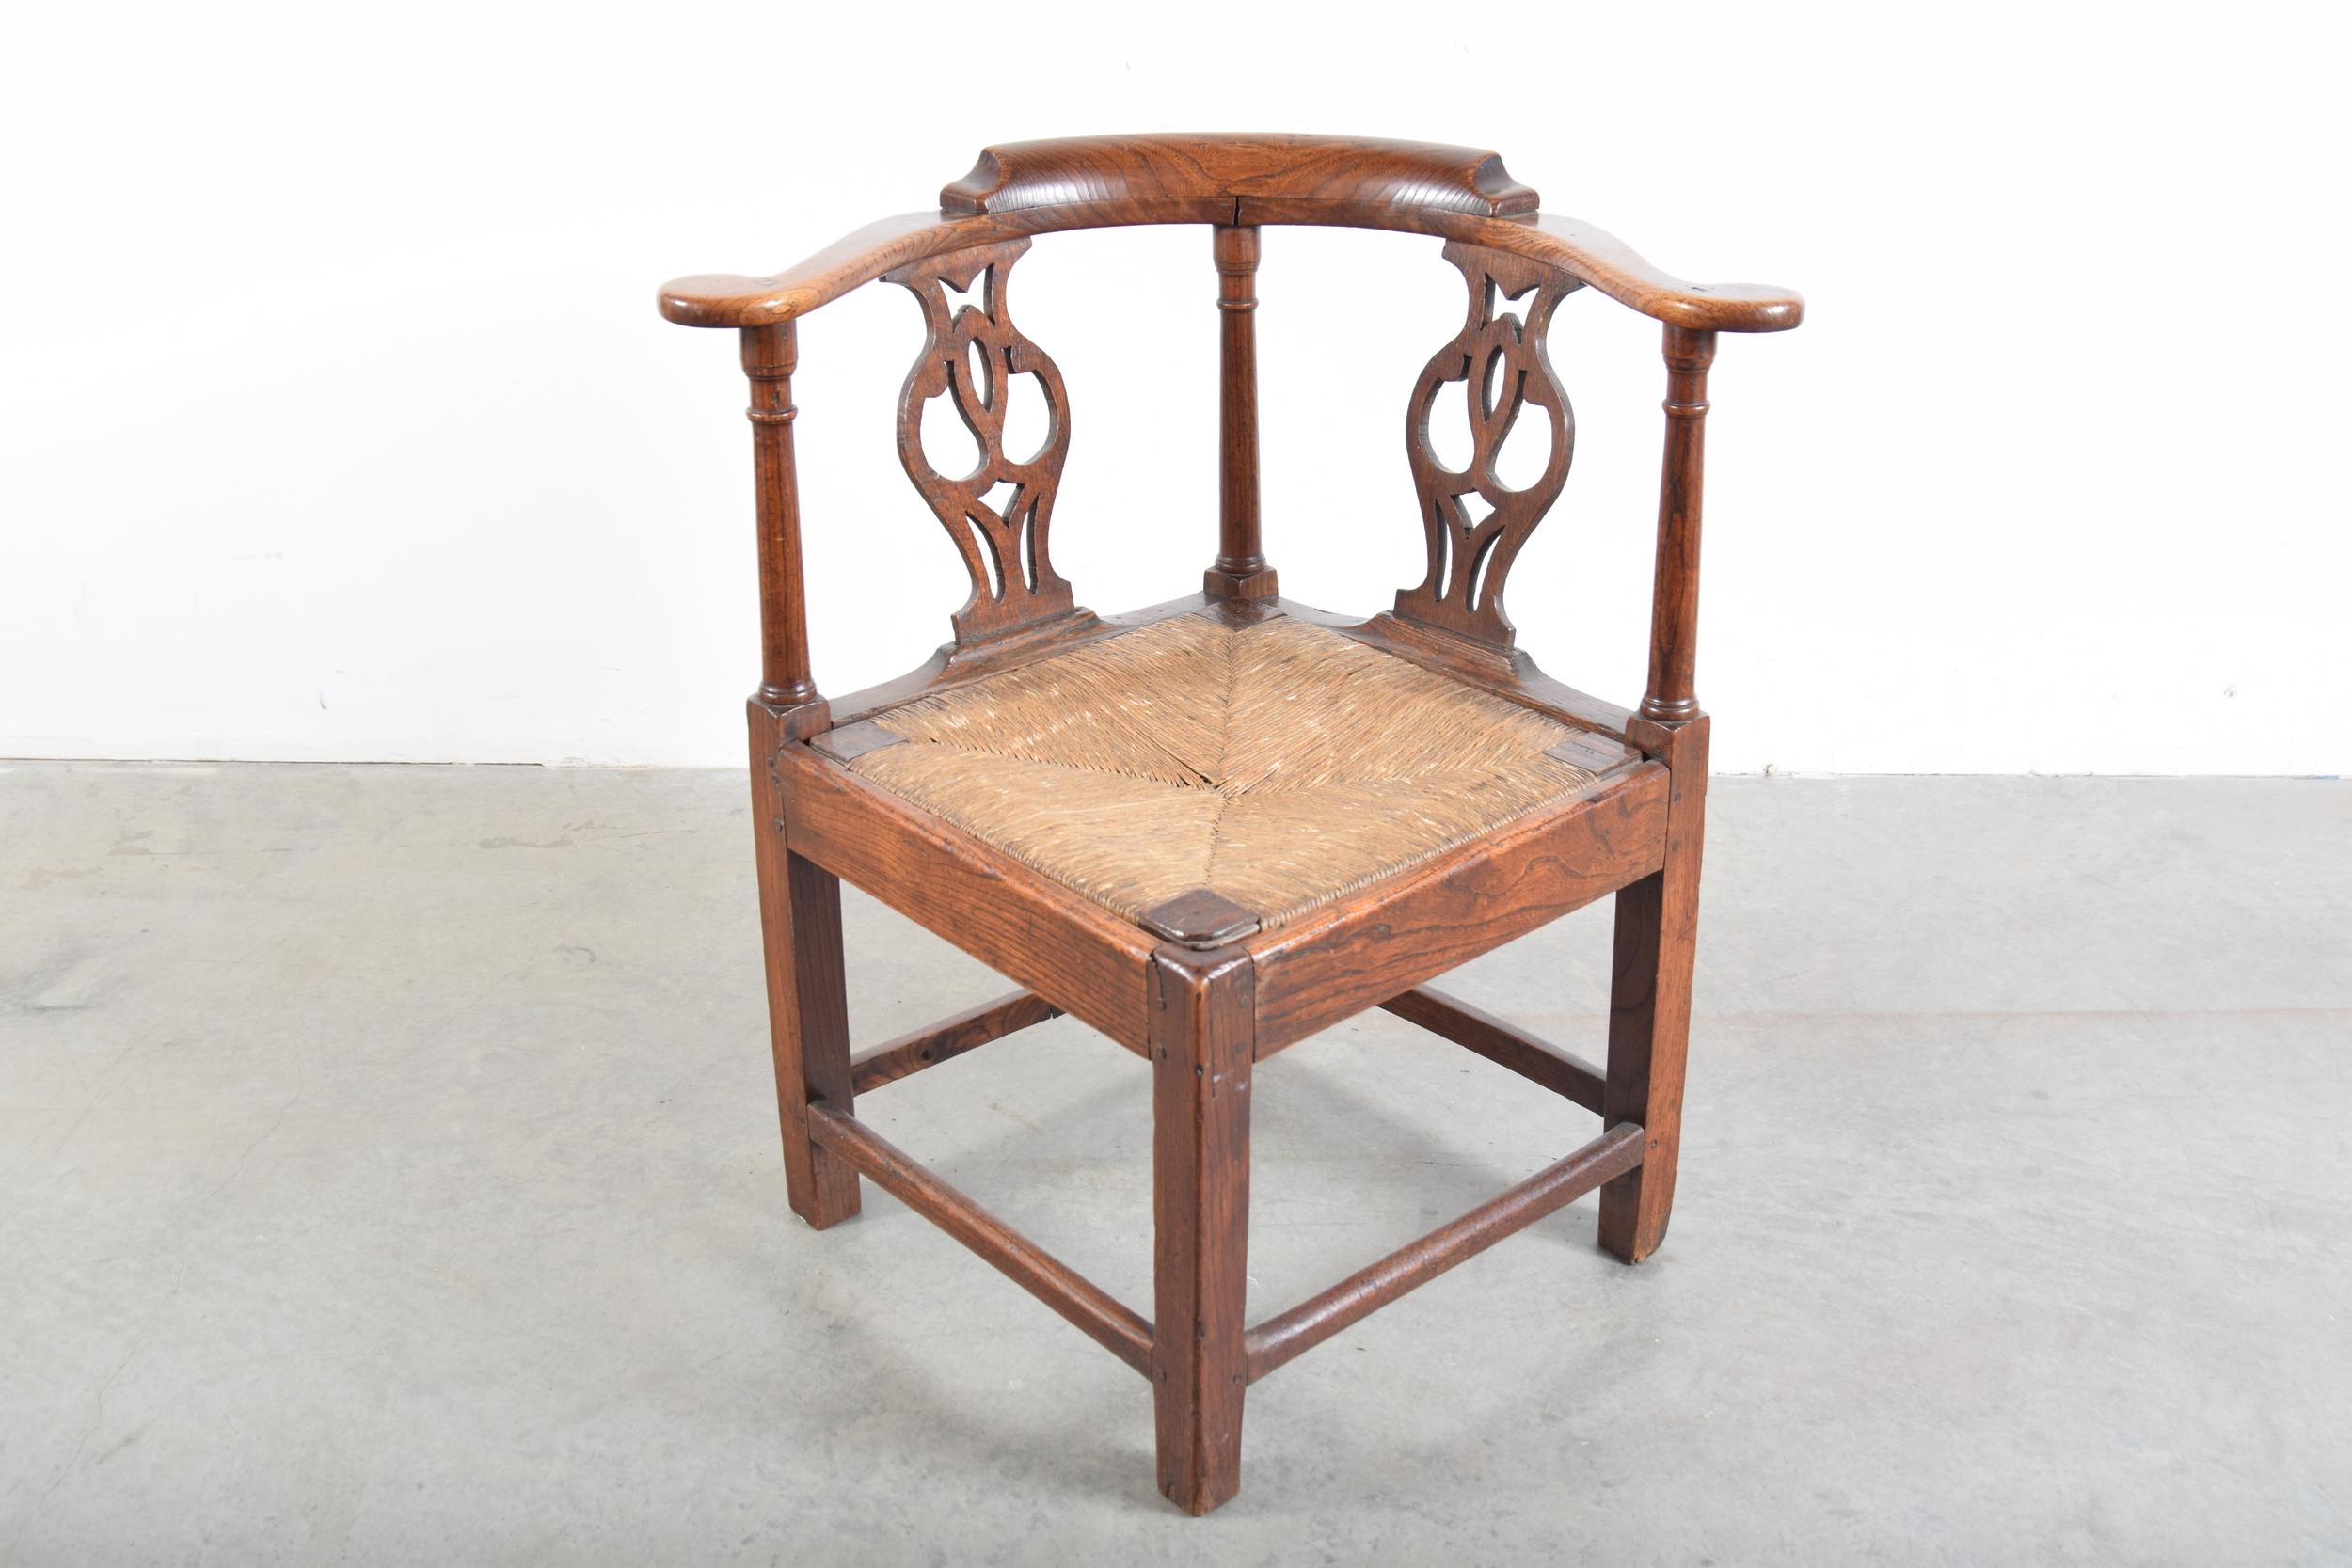 Elm Chippendale corner chair with rush seat, circa 1780-1820. Most likely English. As with many pieces of this age, there have been some repairs over the years. Most notably, a few of the original square pegs have been replaced with round pegs.